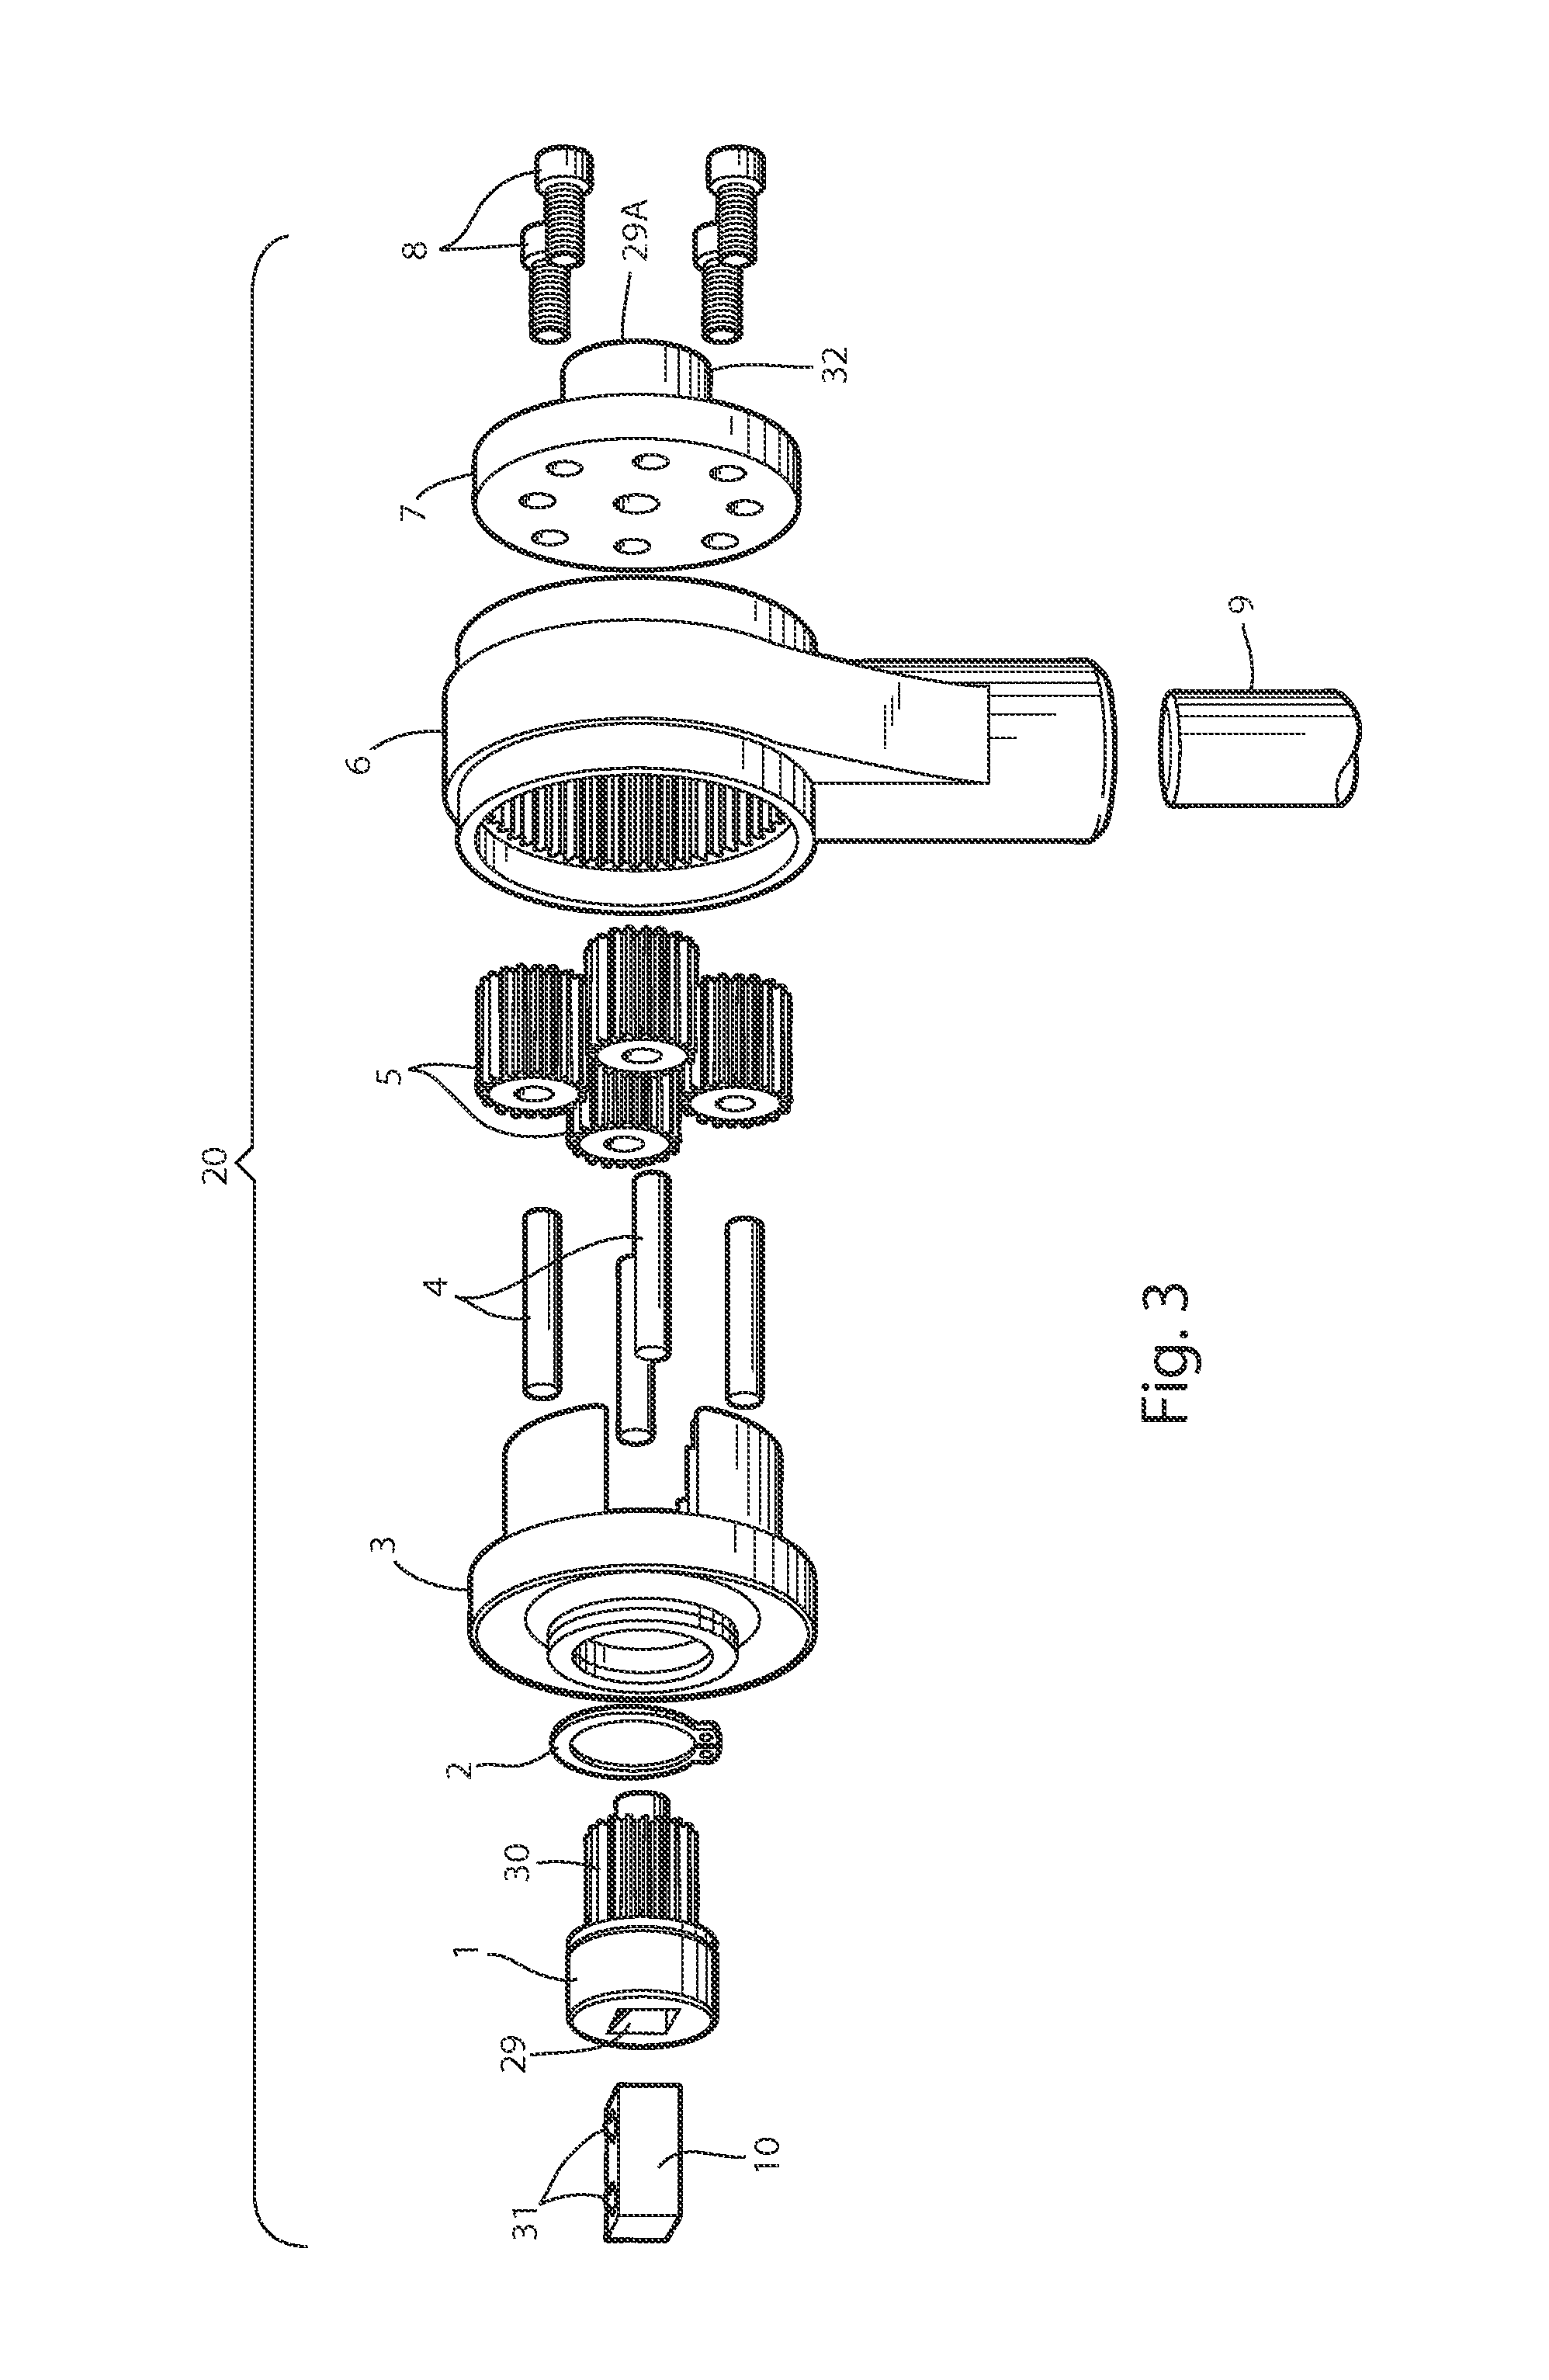 Torque multiplier and method of use